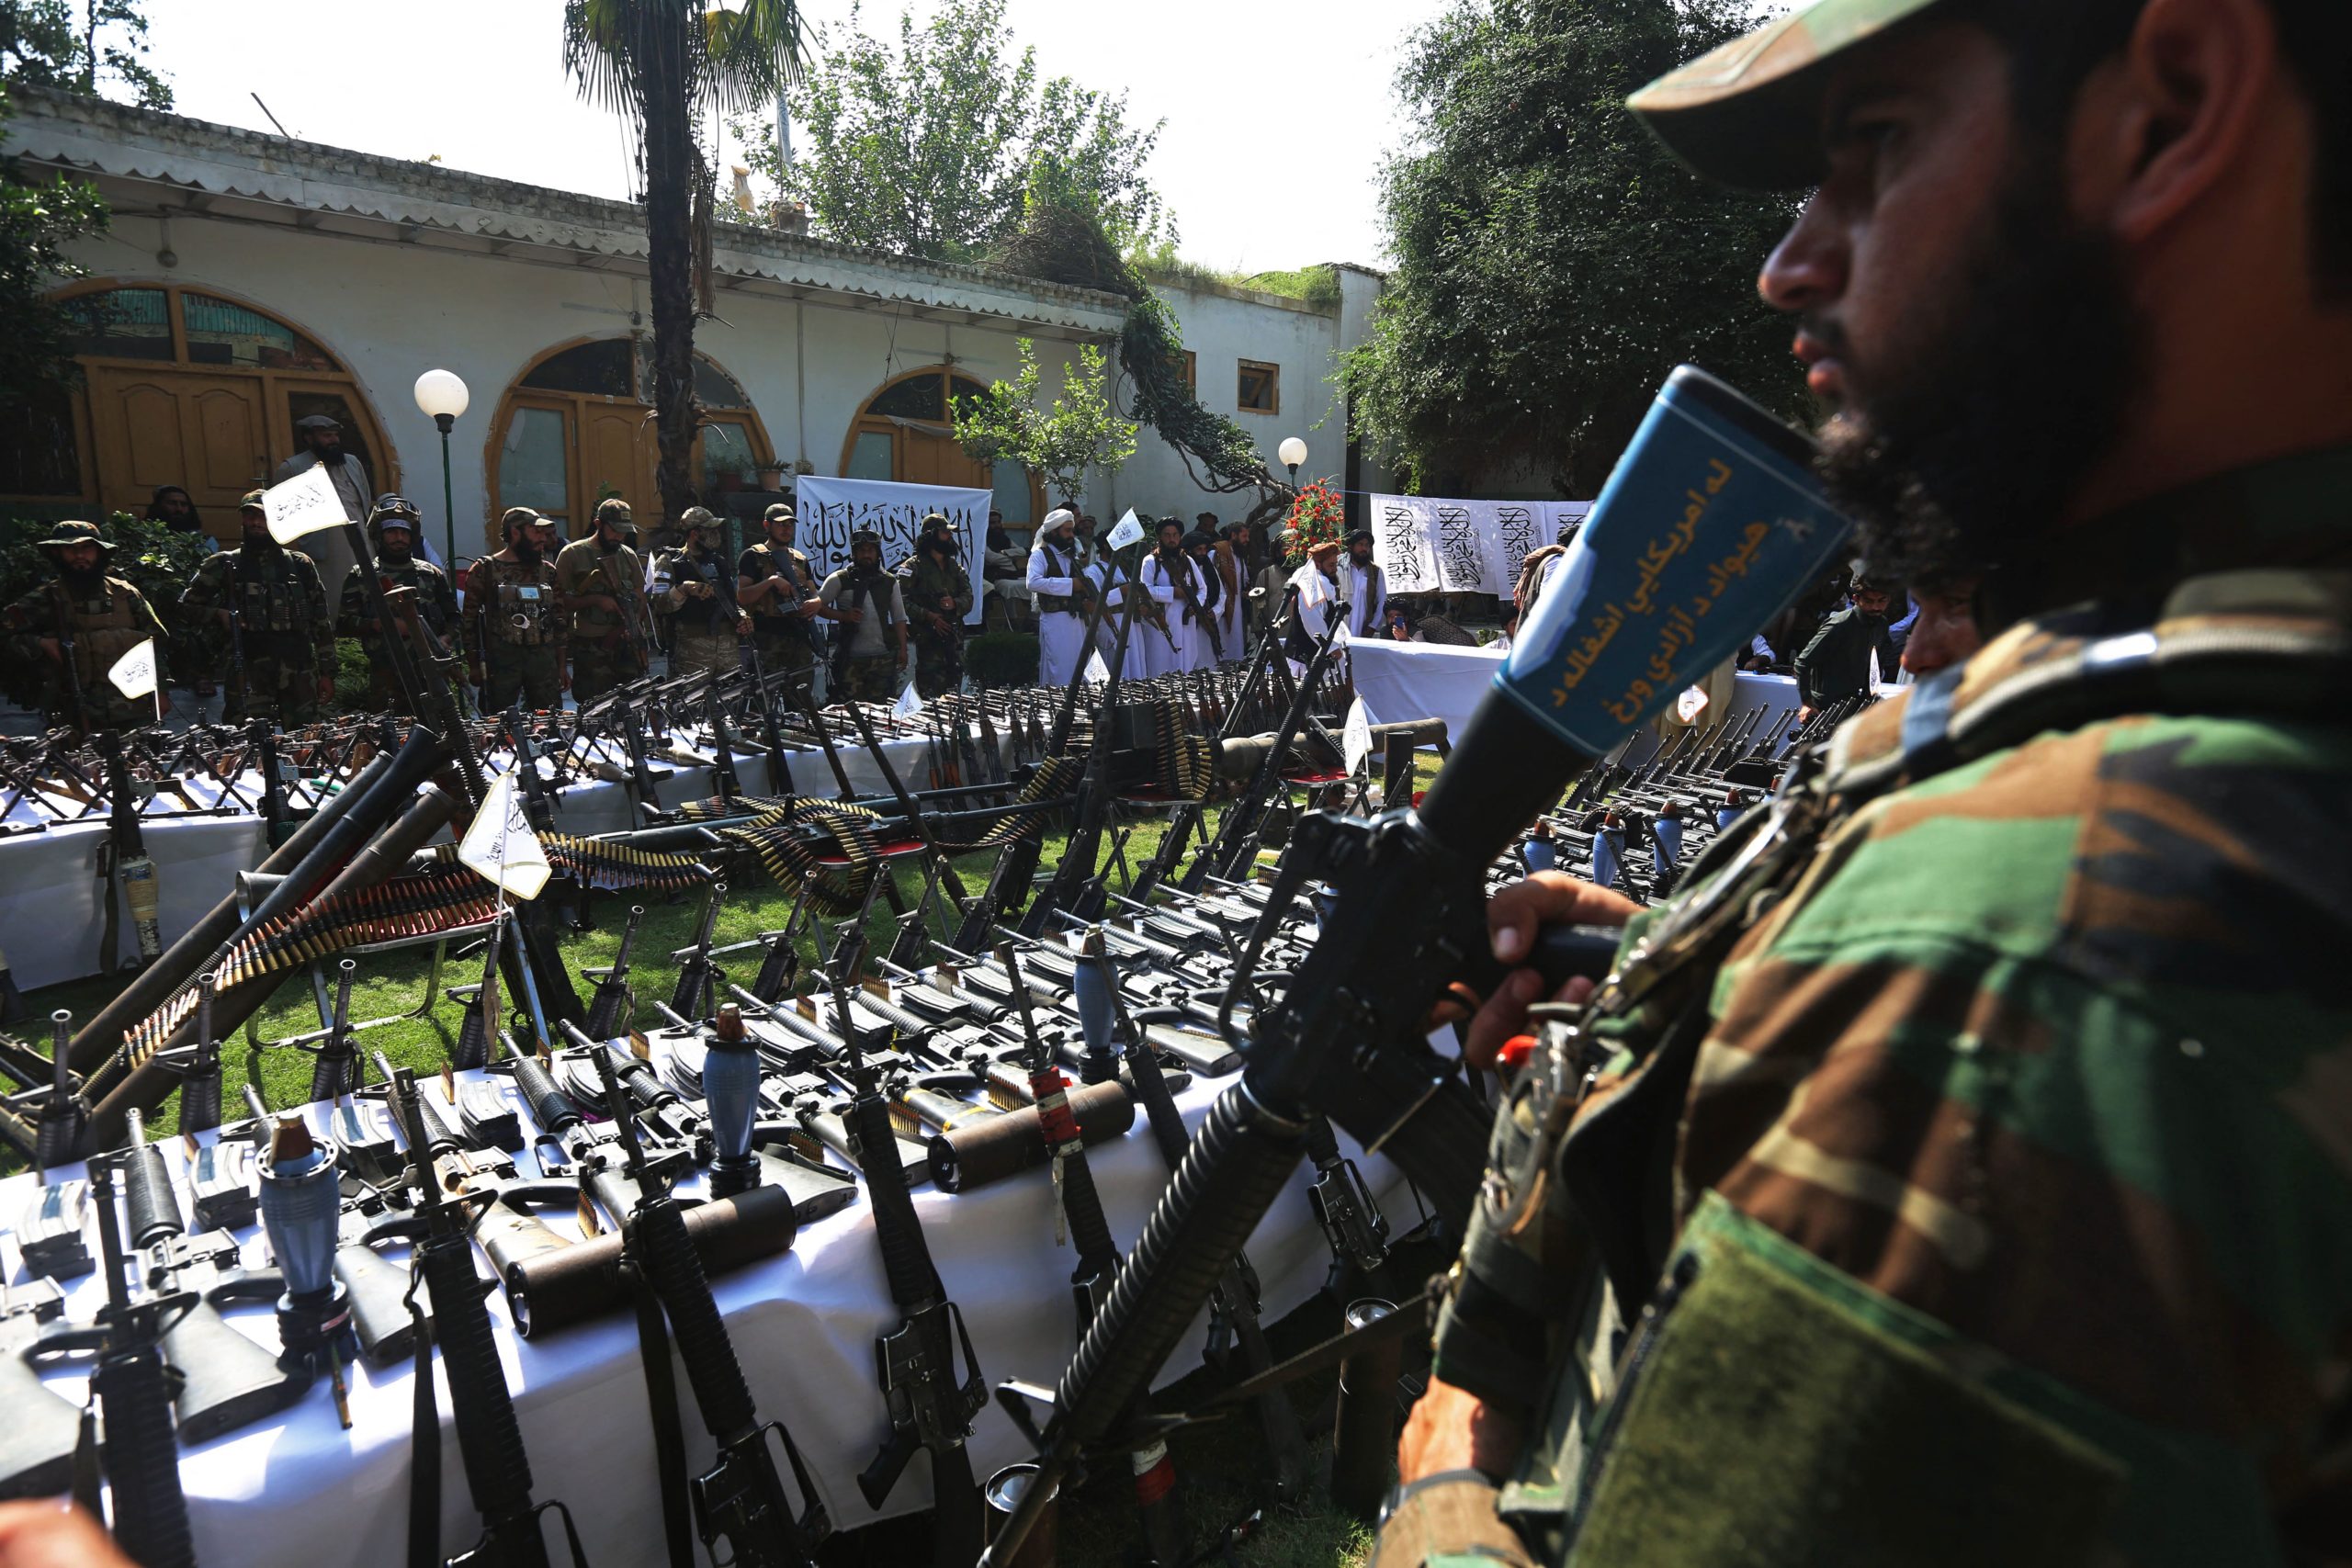 Taliban fighters stand guard next to the weapons on display for media representatives after an operation in which weapons and ammunition were seized from various locations in Asadabad of Kunar Province on September 25, 2022.